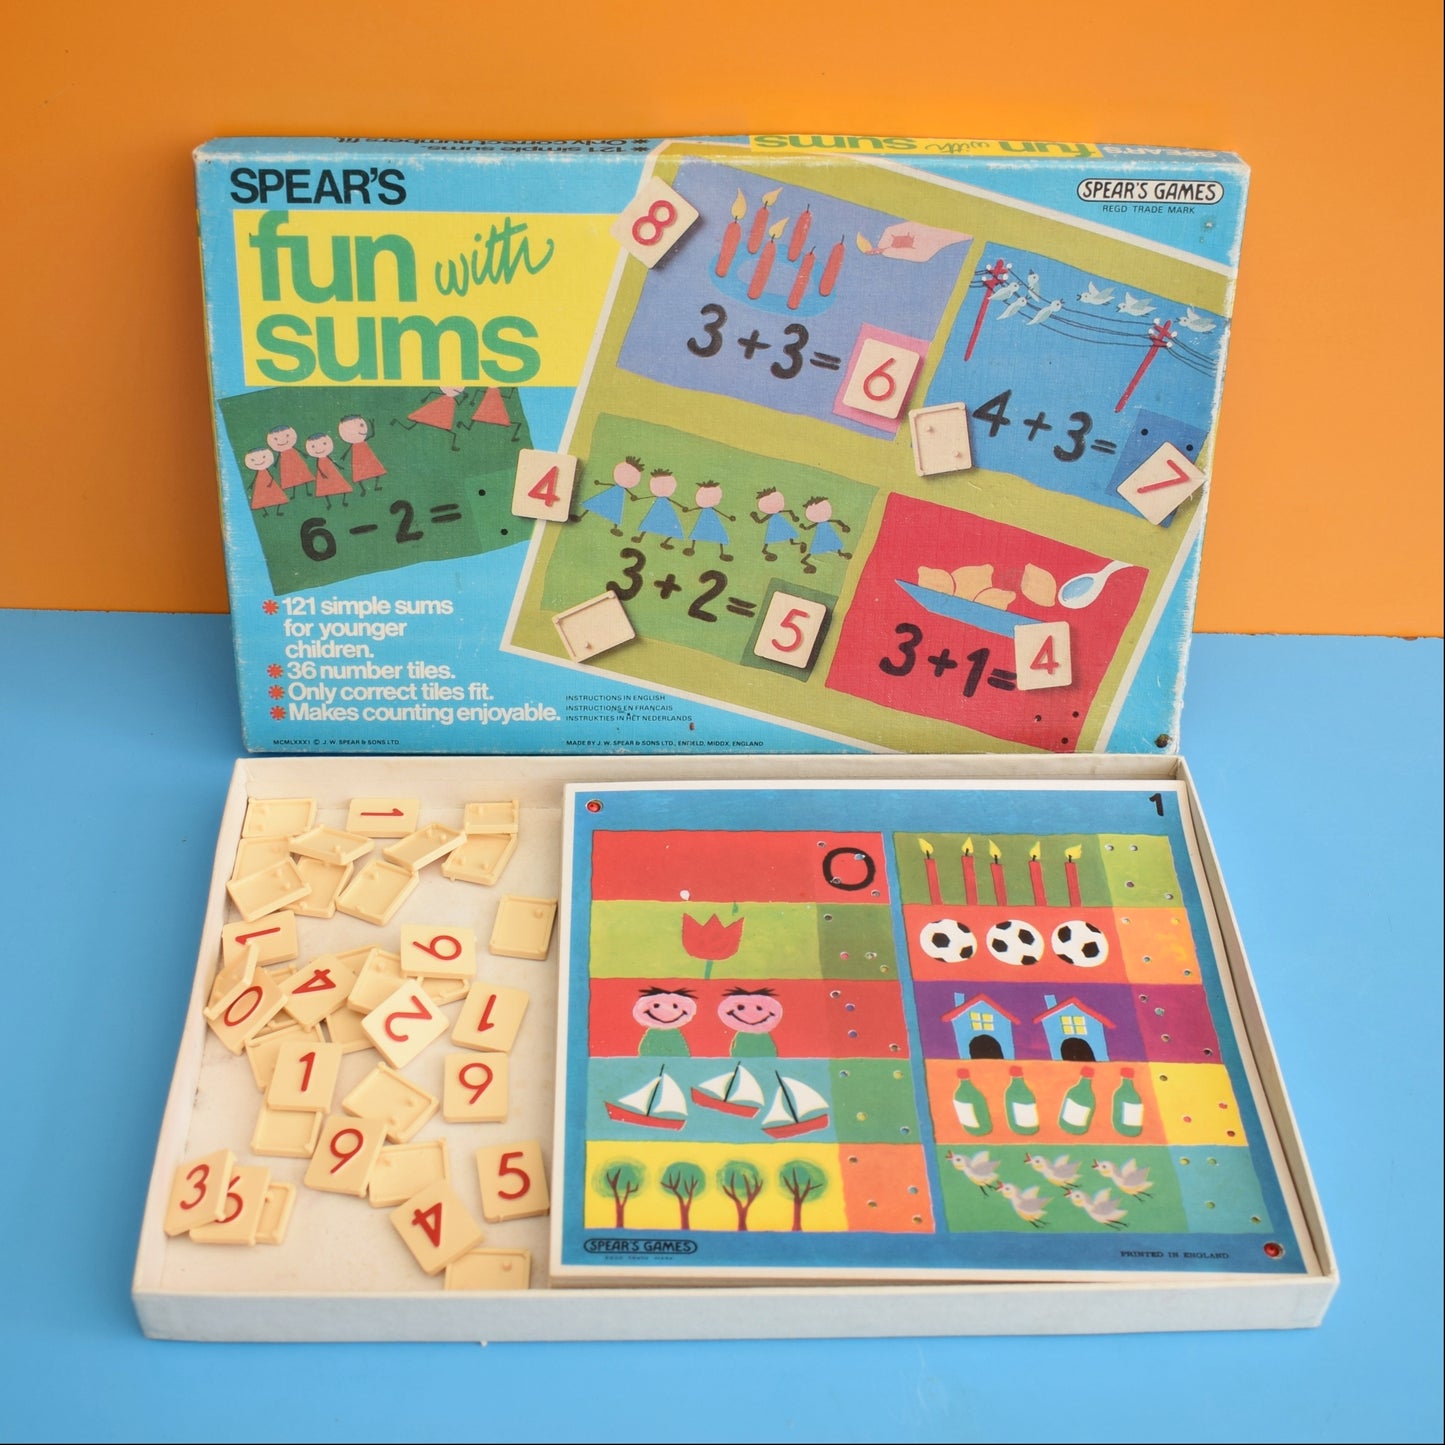 Vintage 1980s Fun With Sums - by Spears